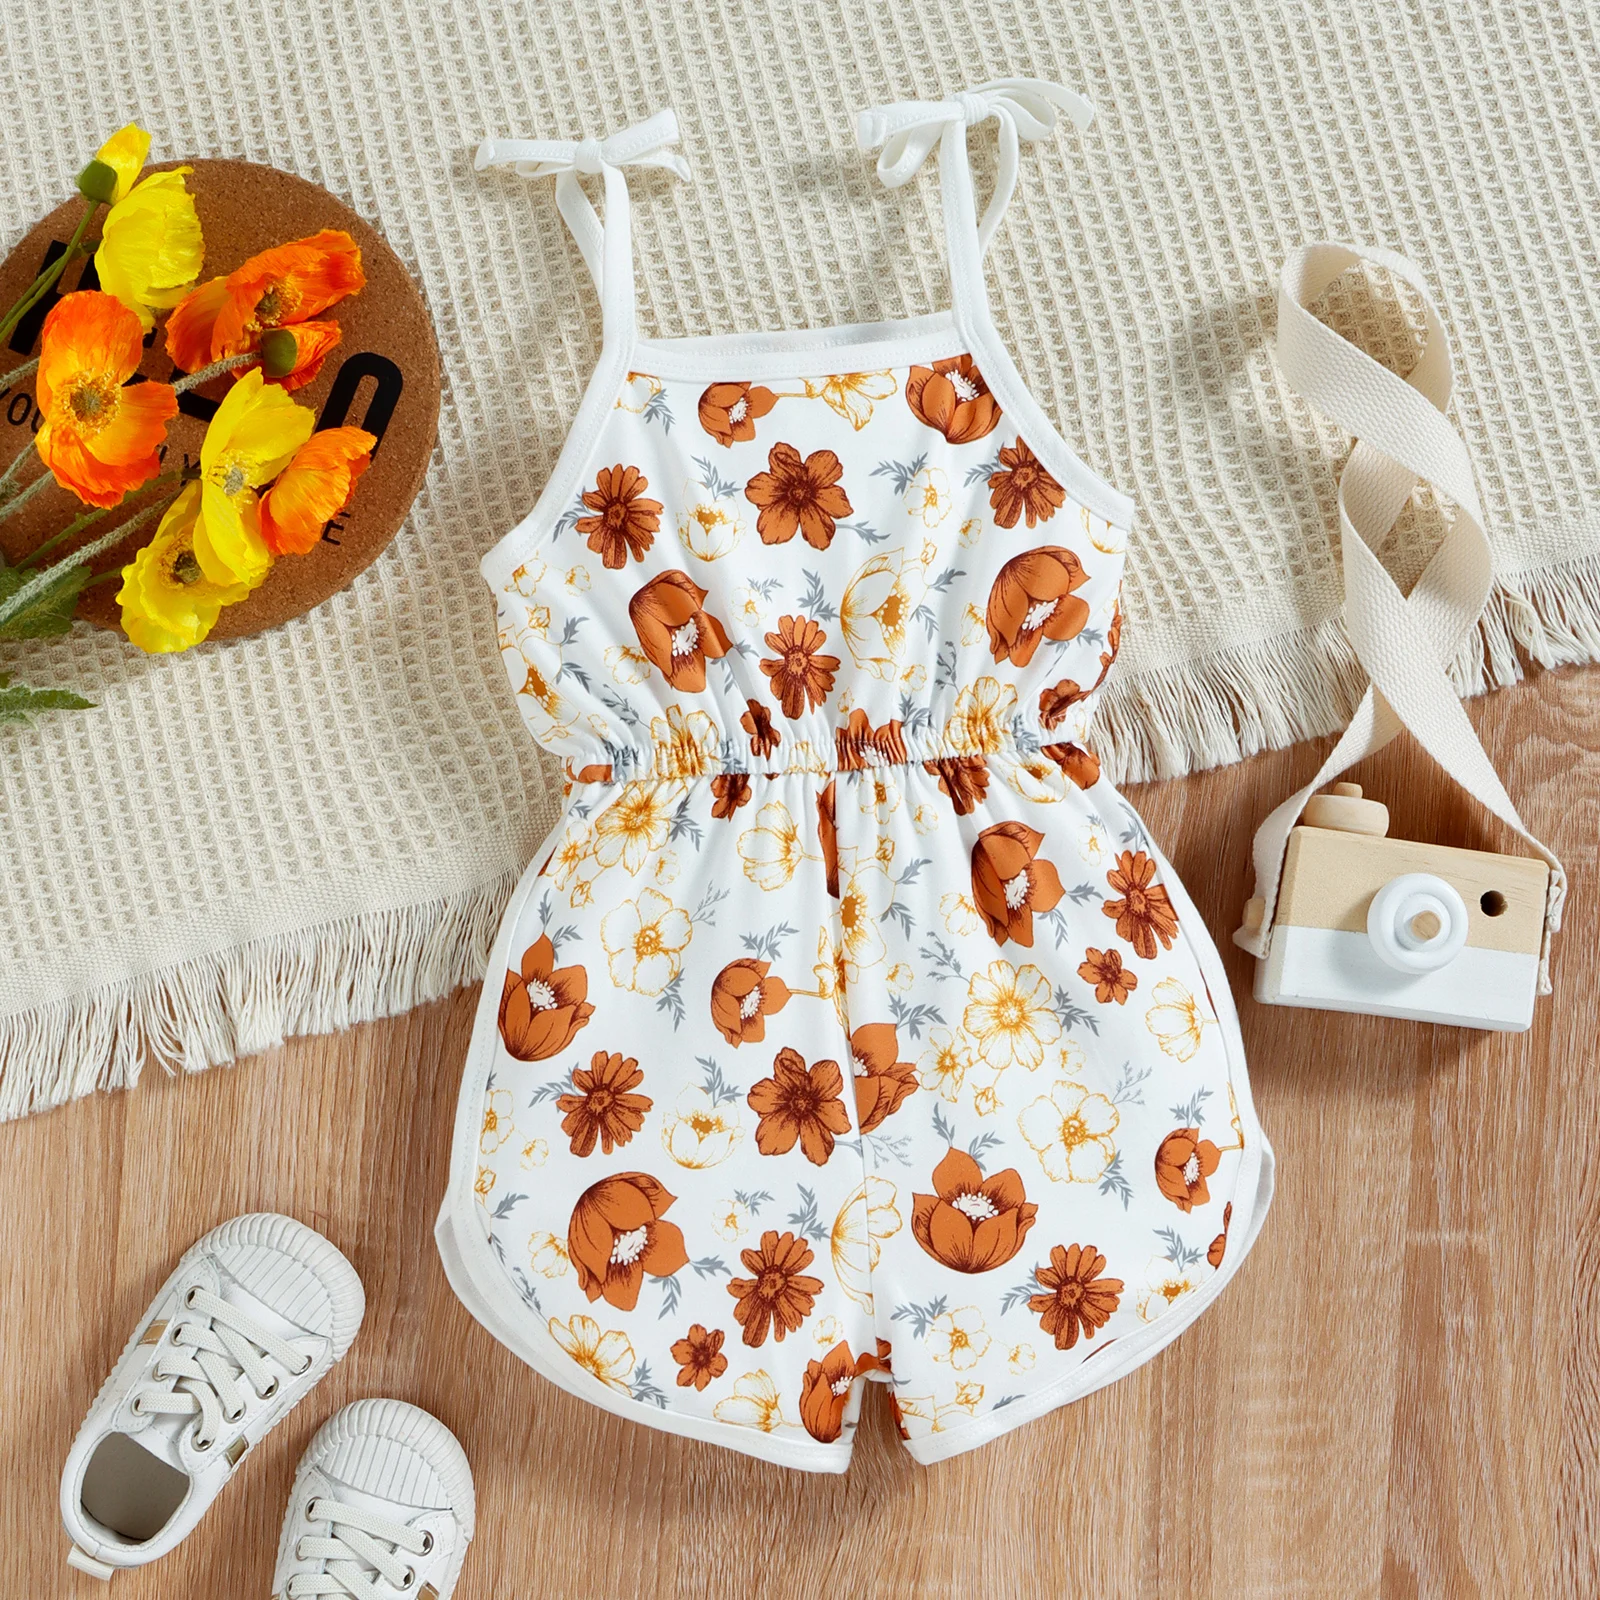 carters baby bodysuits	 Toddler Baby Girls Playsuit Tie-up Suspender Sleeveless Floral Printed Elastic Waist Short Jumpsuit 6M-3T Baby Jumpsuit Cotton 